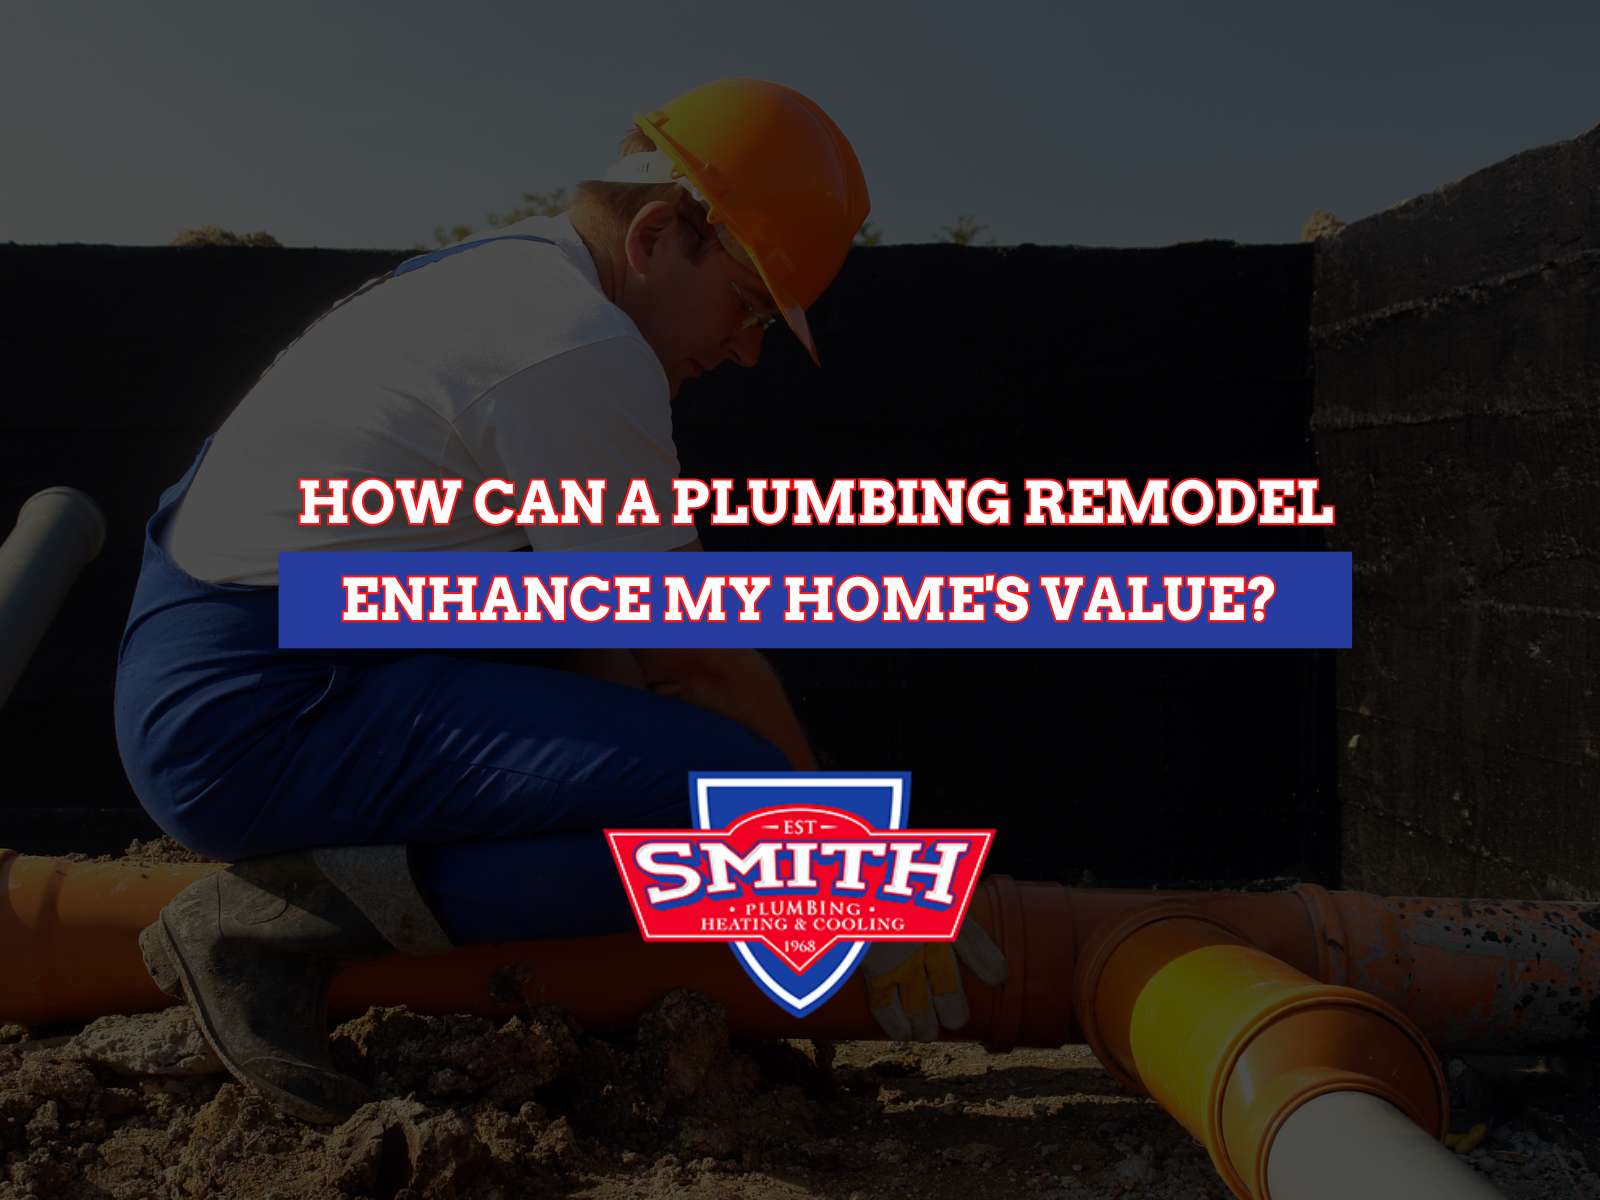 How Can a Plumbing Remodel Enhance My Home's Value?